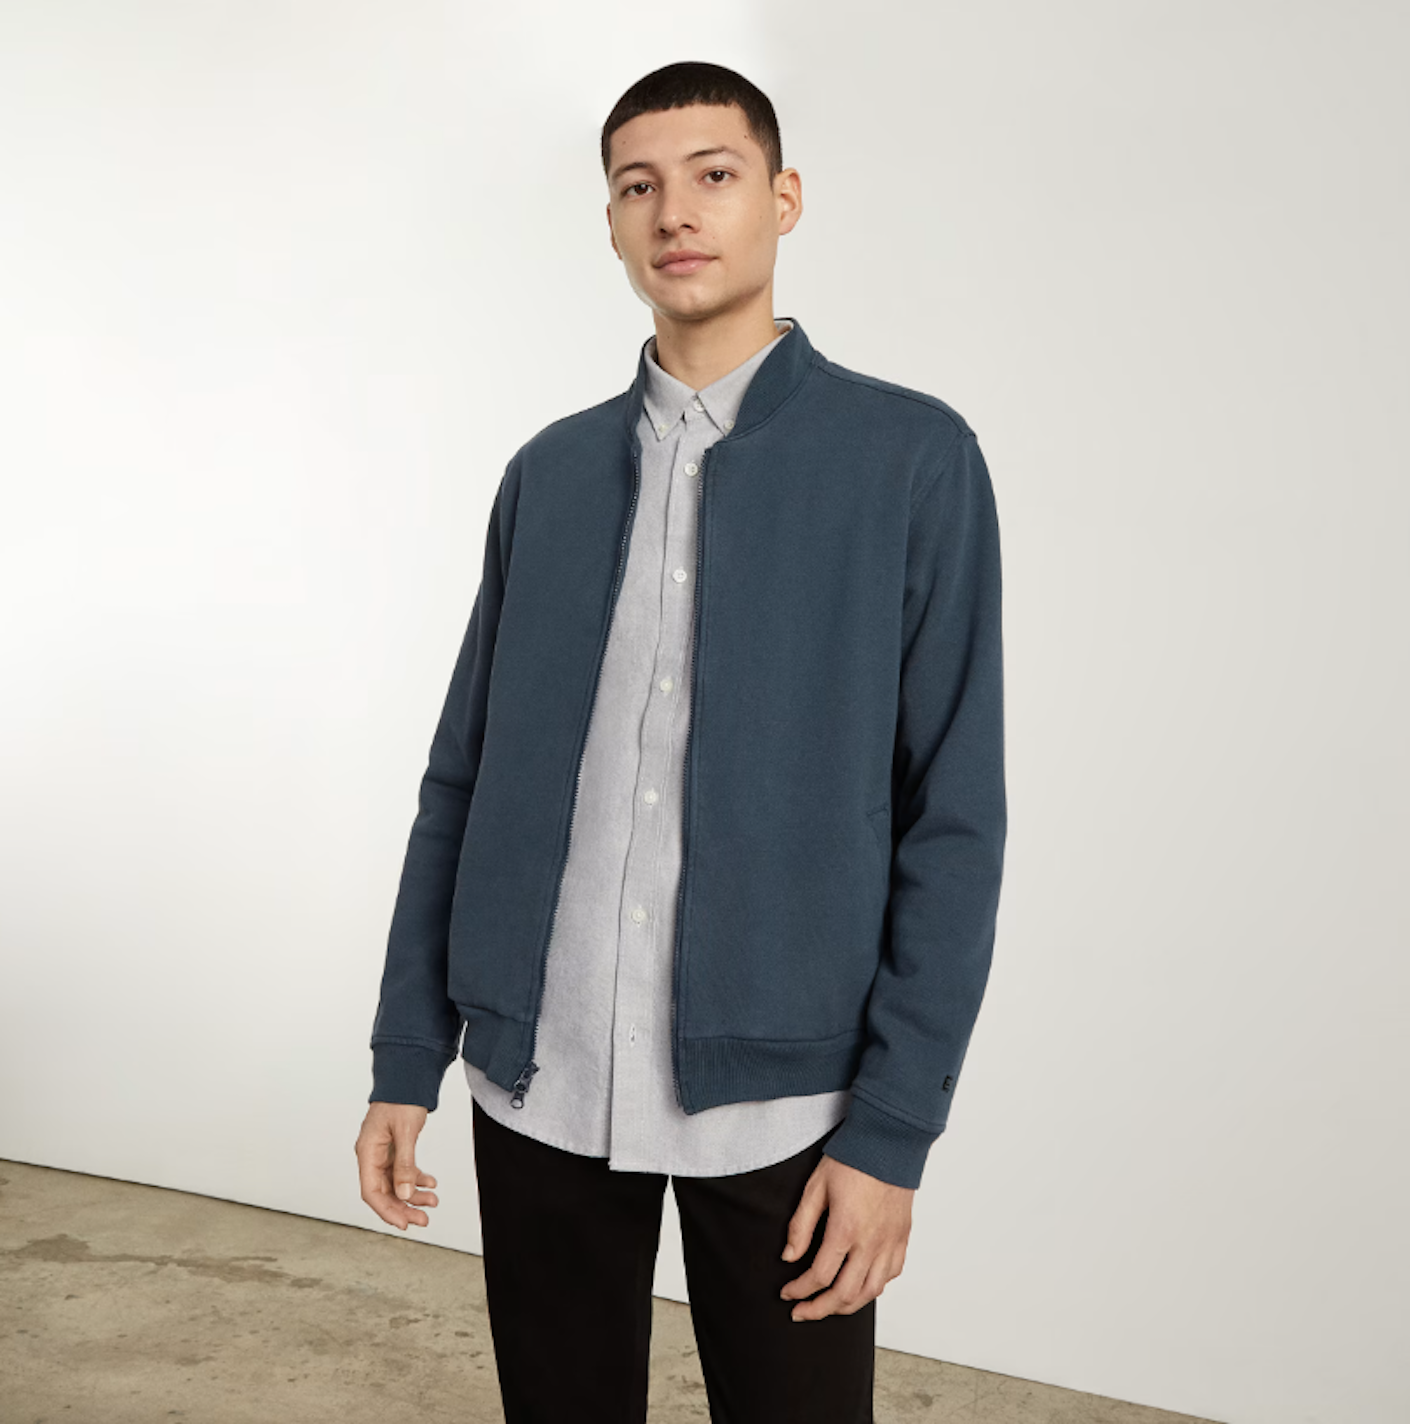 A man wears a classic, fitted slate blue track jacket over a button down shirt and jeans.